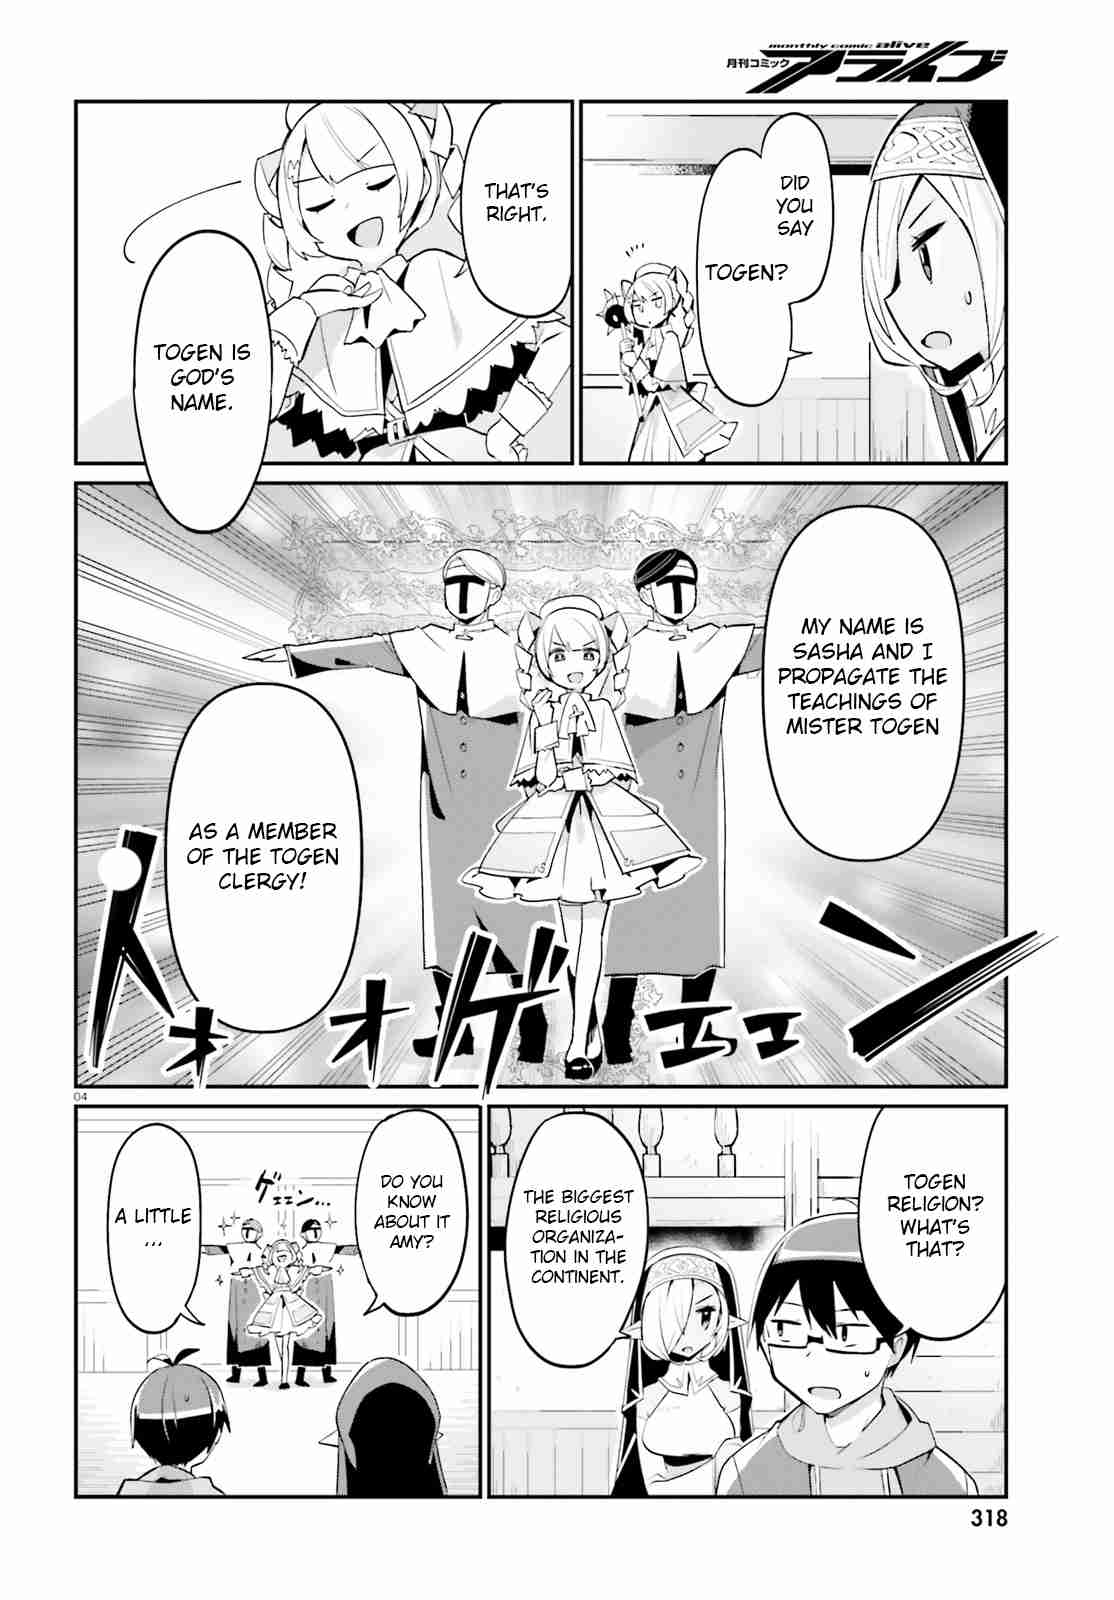 Welcome to religion in another world Vol. 1 Ch. 7 Welcome to Togen's people